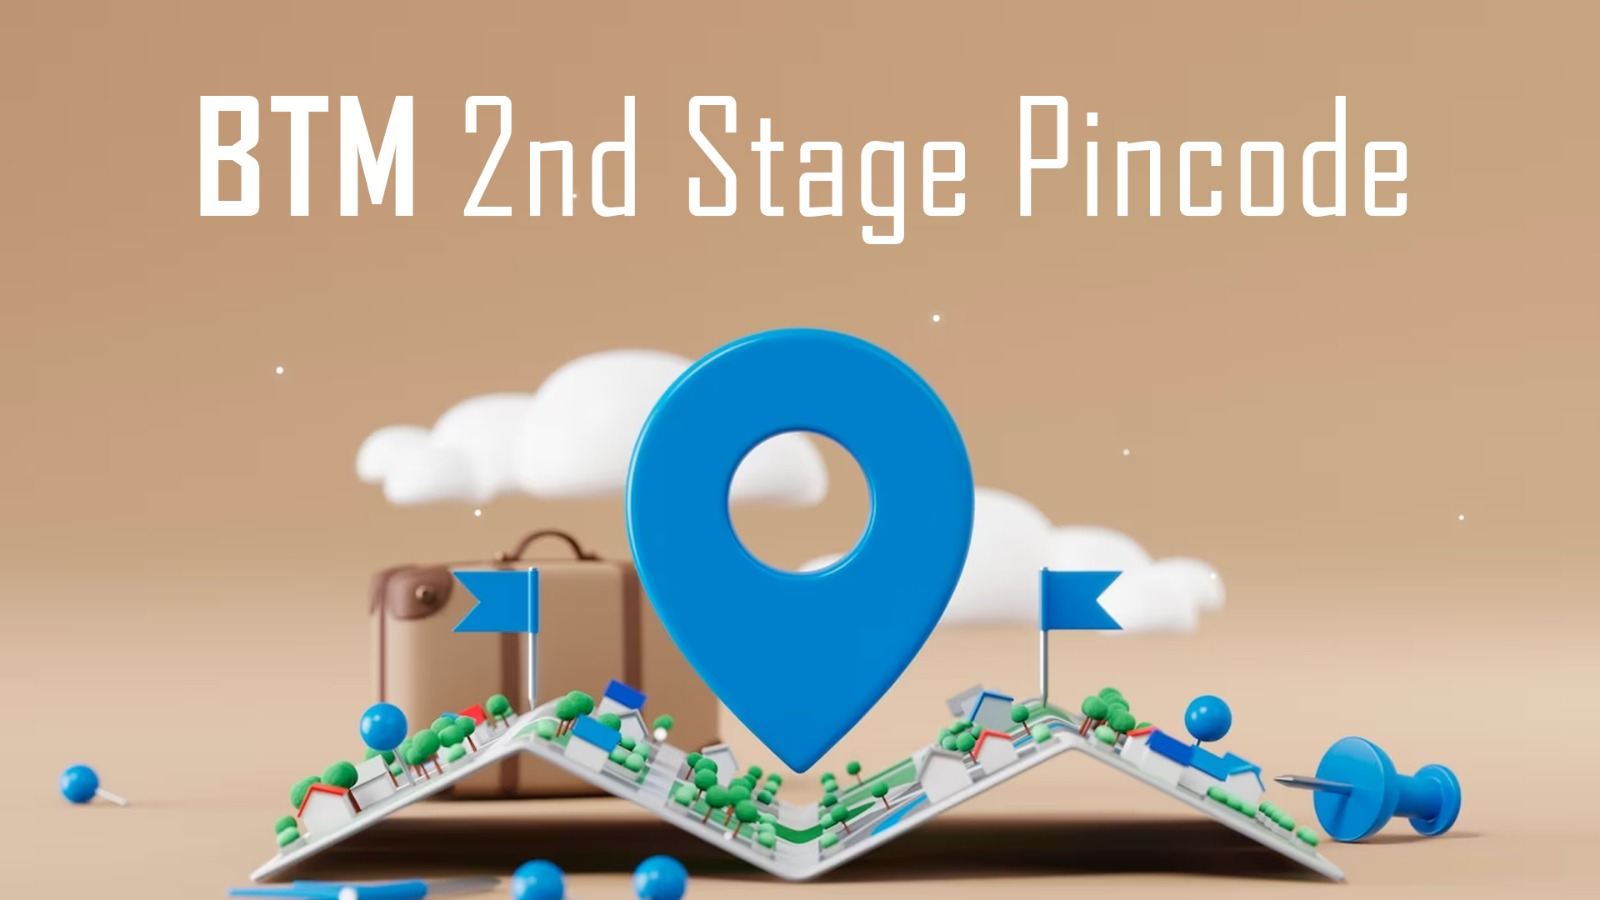 What’s BTM 2nd Stage Pincode